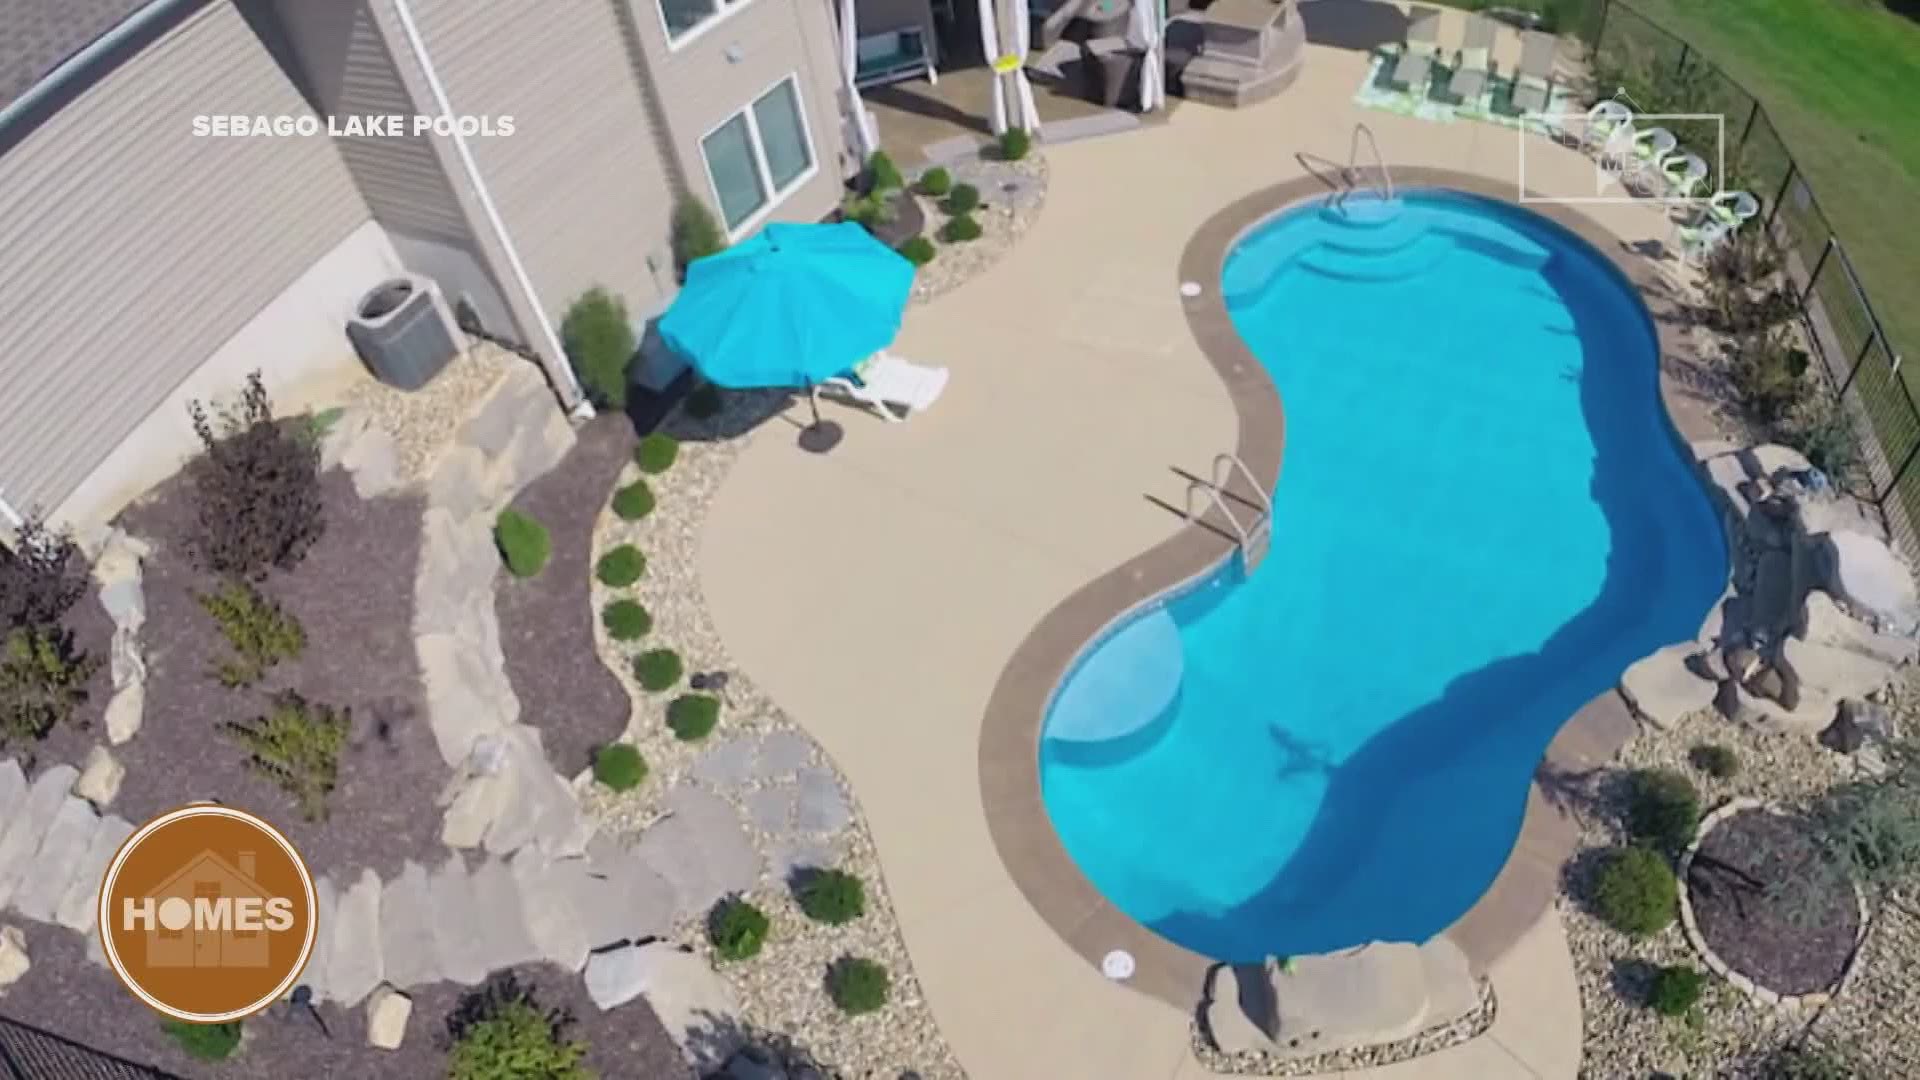 Local pool businesses are seeing a surge as Mainers are looking for ways to get outside after the coronavirus COVID-19 stay at home orders start to loosen